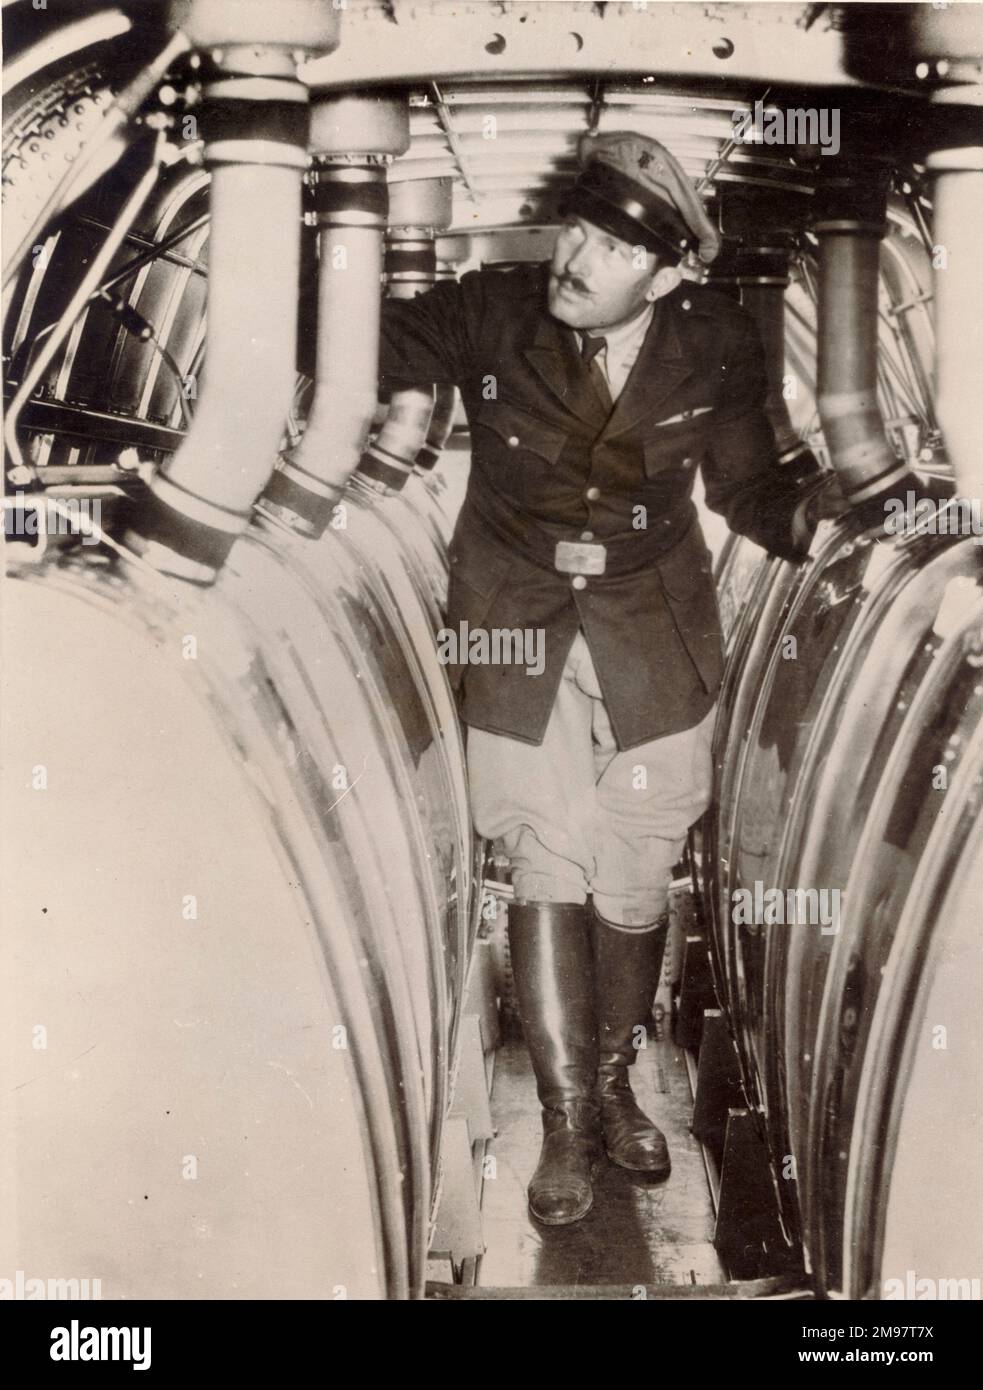 Col Roscoe Turner inspects the additional fuel tanks of the Boeing 247D, NR257Y, Warner Bros. Comet, prior to the MacRobertson England to Australia race of October 1934. Stock Photo